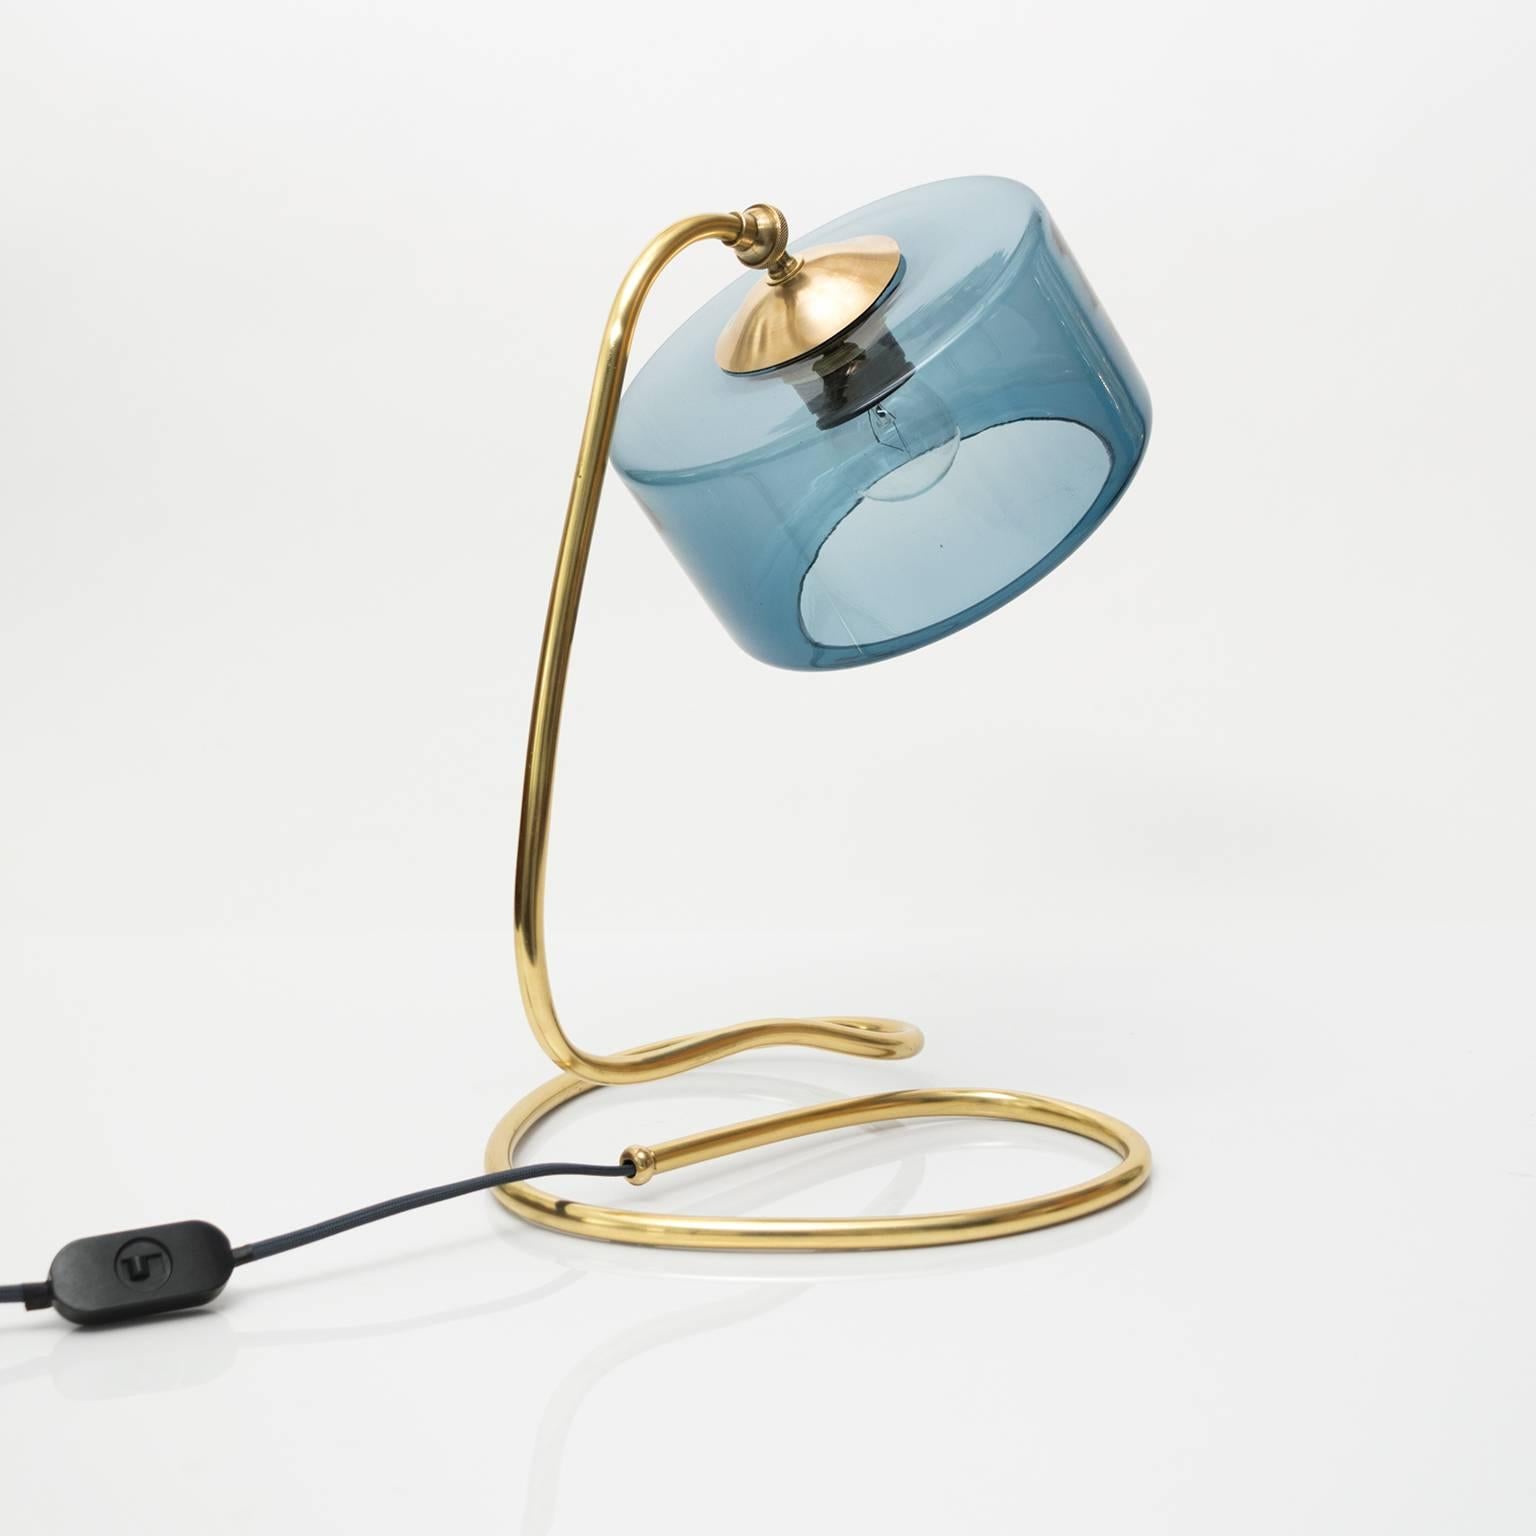 Scandinavian modern table lamp with a polished coil base and clear blue glass shade. Newly restored polished and lacquered brass and wired with a single standard base socket.
Measures: Height: 14